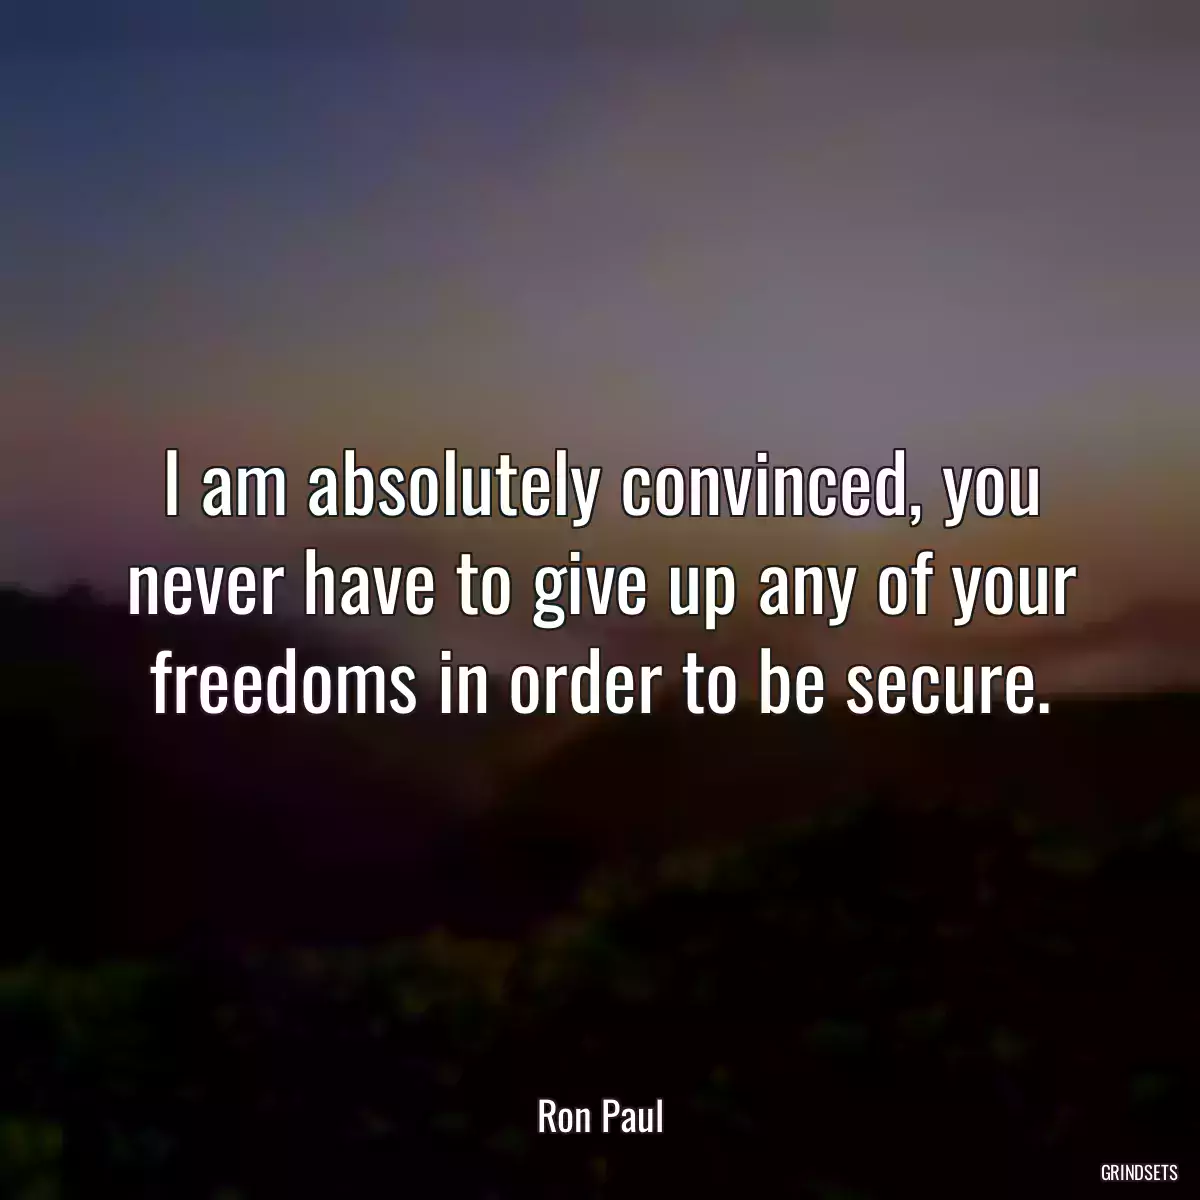 I am absolutely convinced, you never have to give up any of your freedoms in order to be secure.